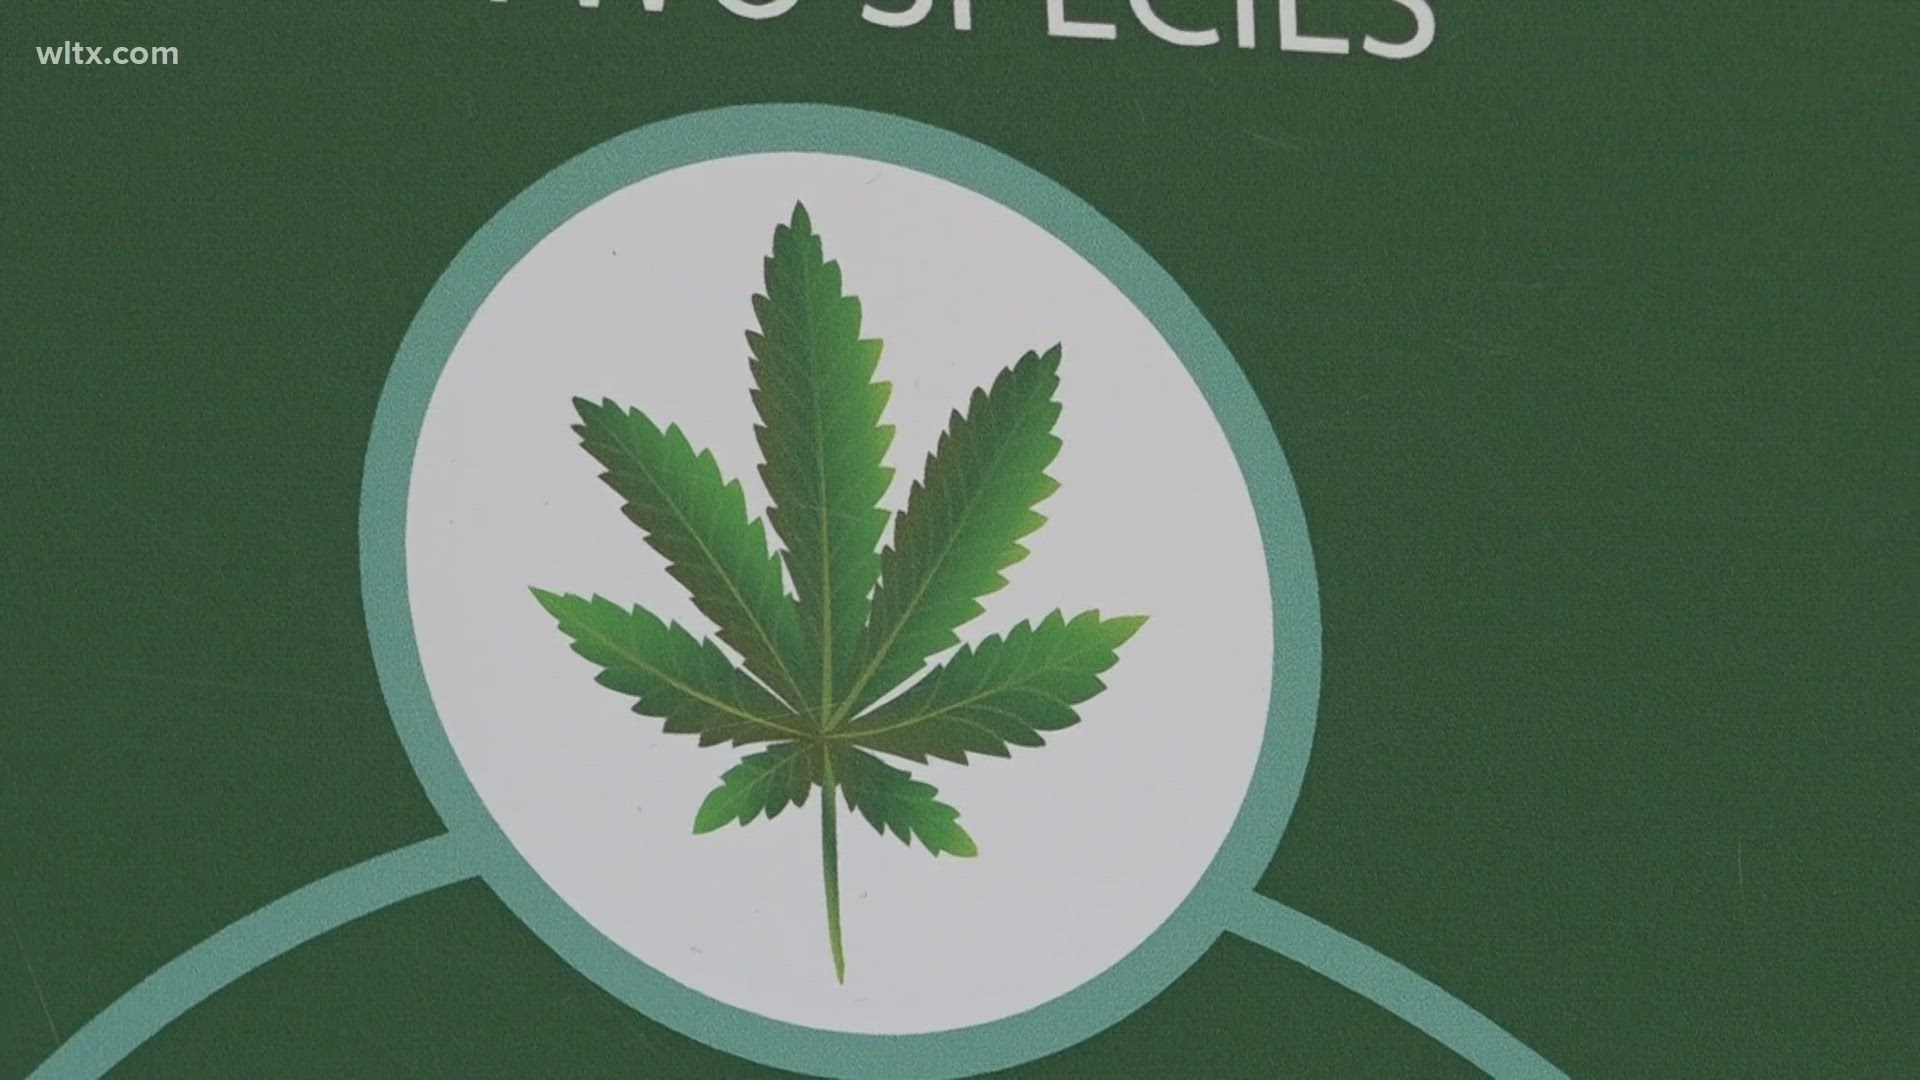 Many will have to forgo the "pot leaf" on many store signs.